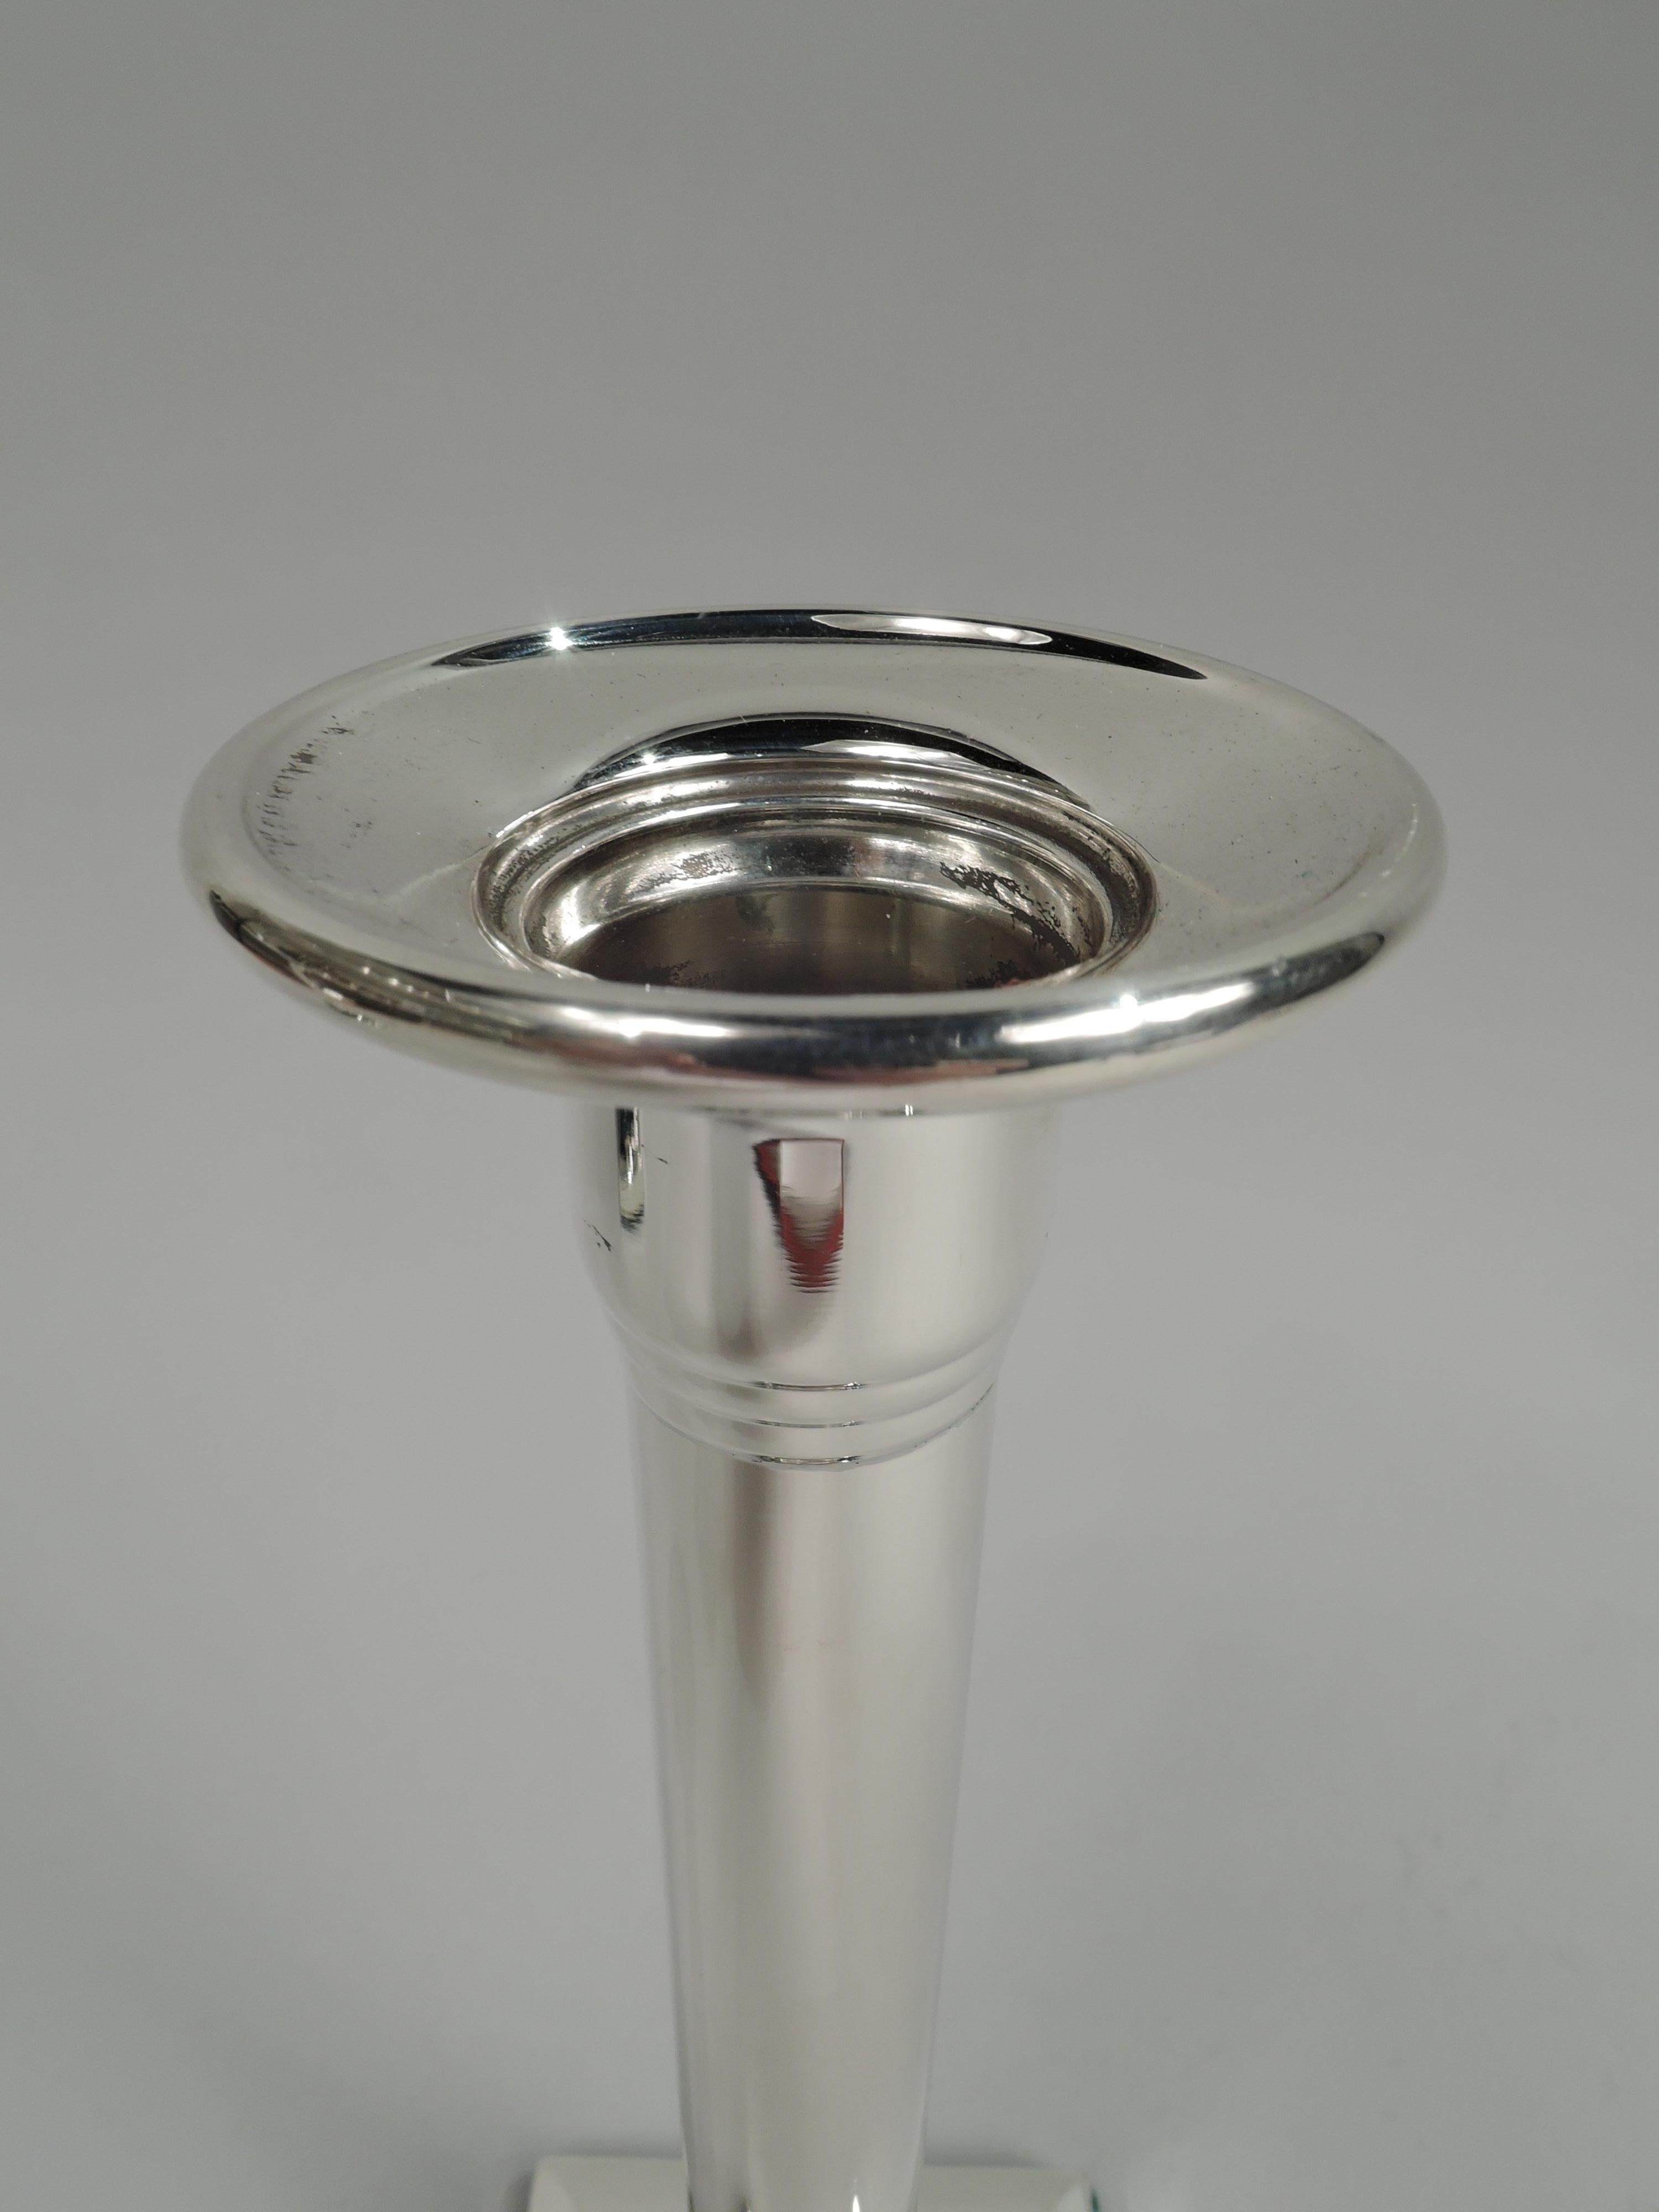 Pair of elegant American Modern Classical sterling silver candlesticks, ca 1920. Each: Columnar shaft with stepped top and bottom on raised square base. Felt-lined underside. Marked “Sterling / Weighted / 925”.